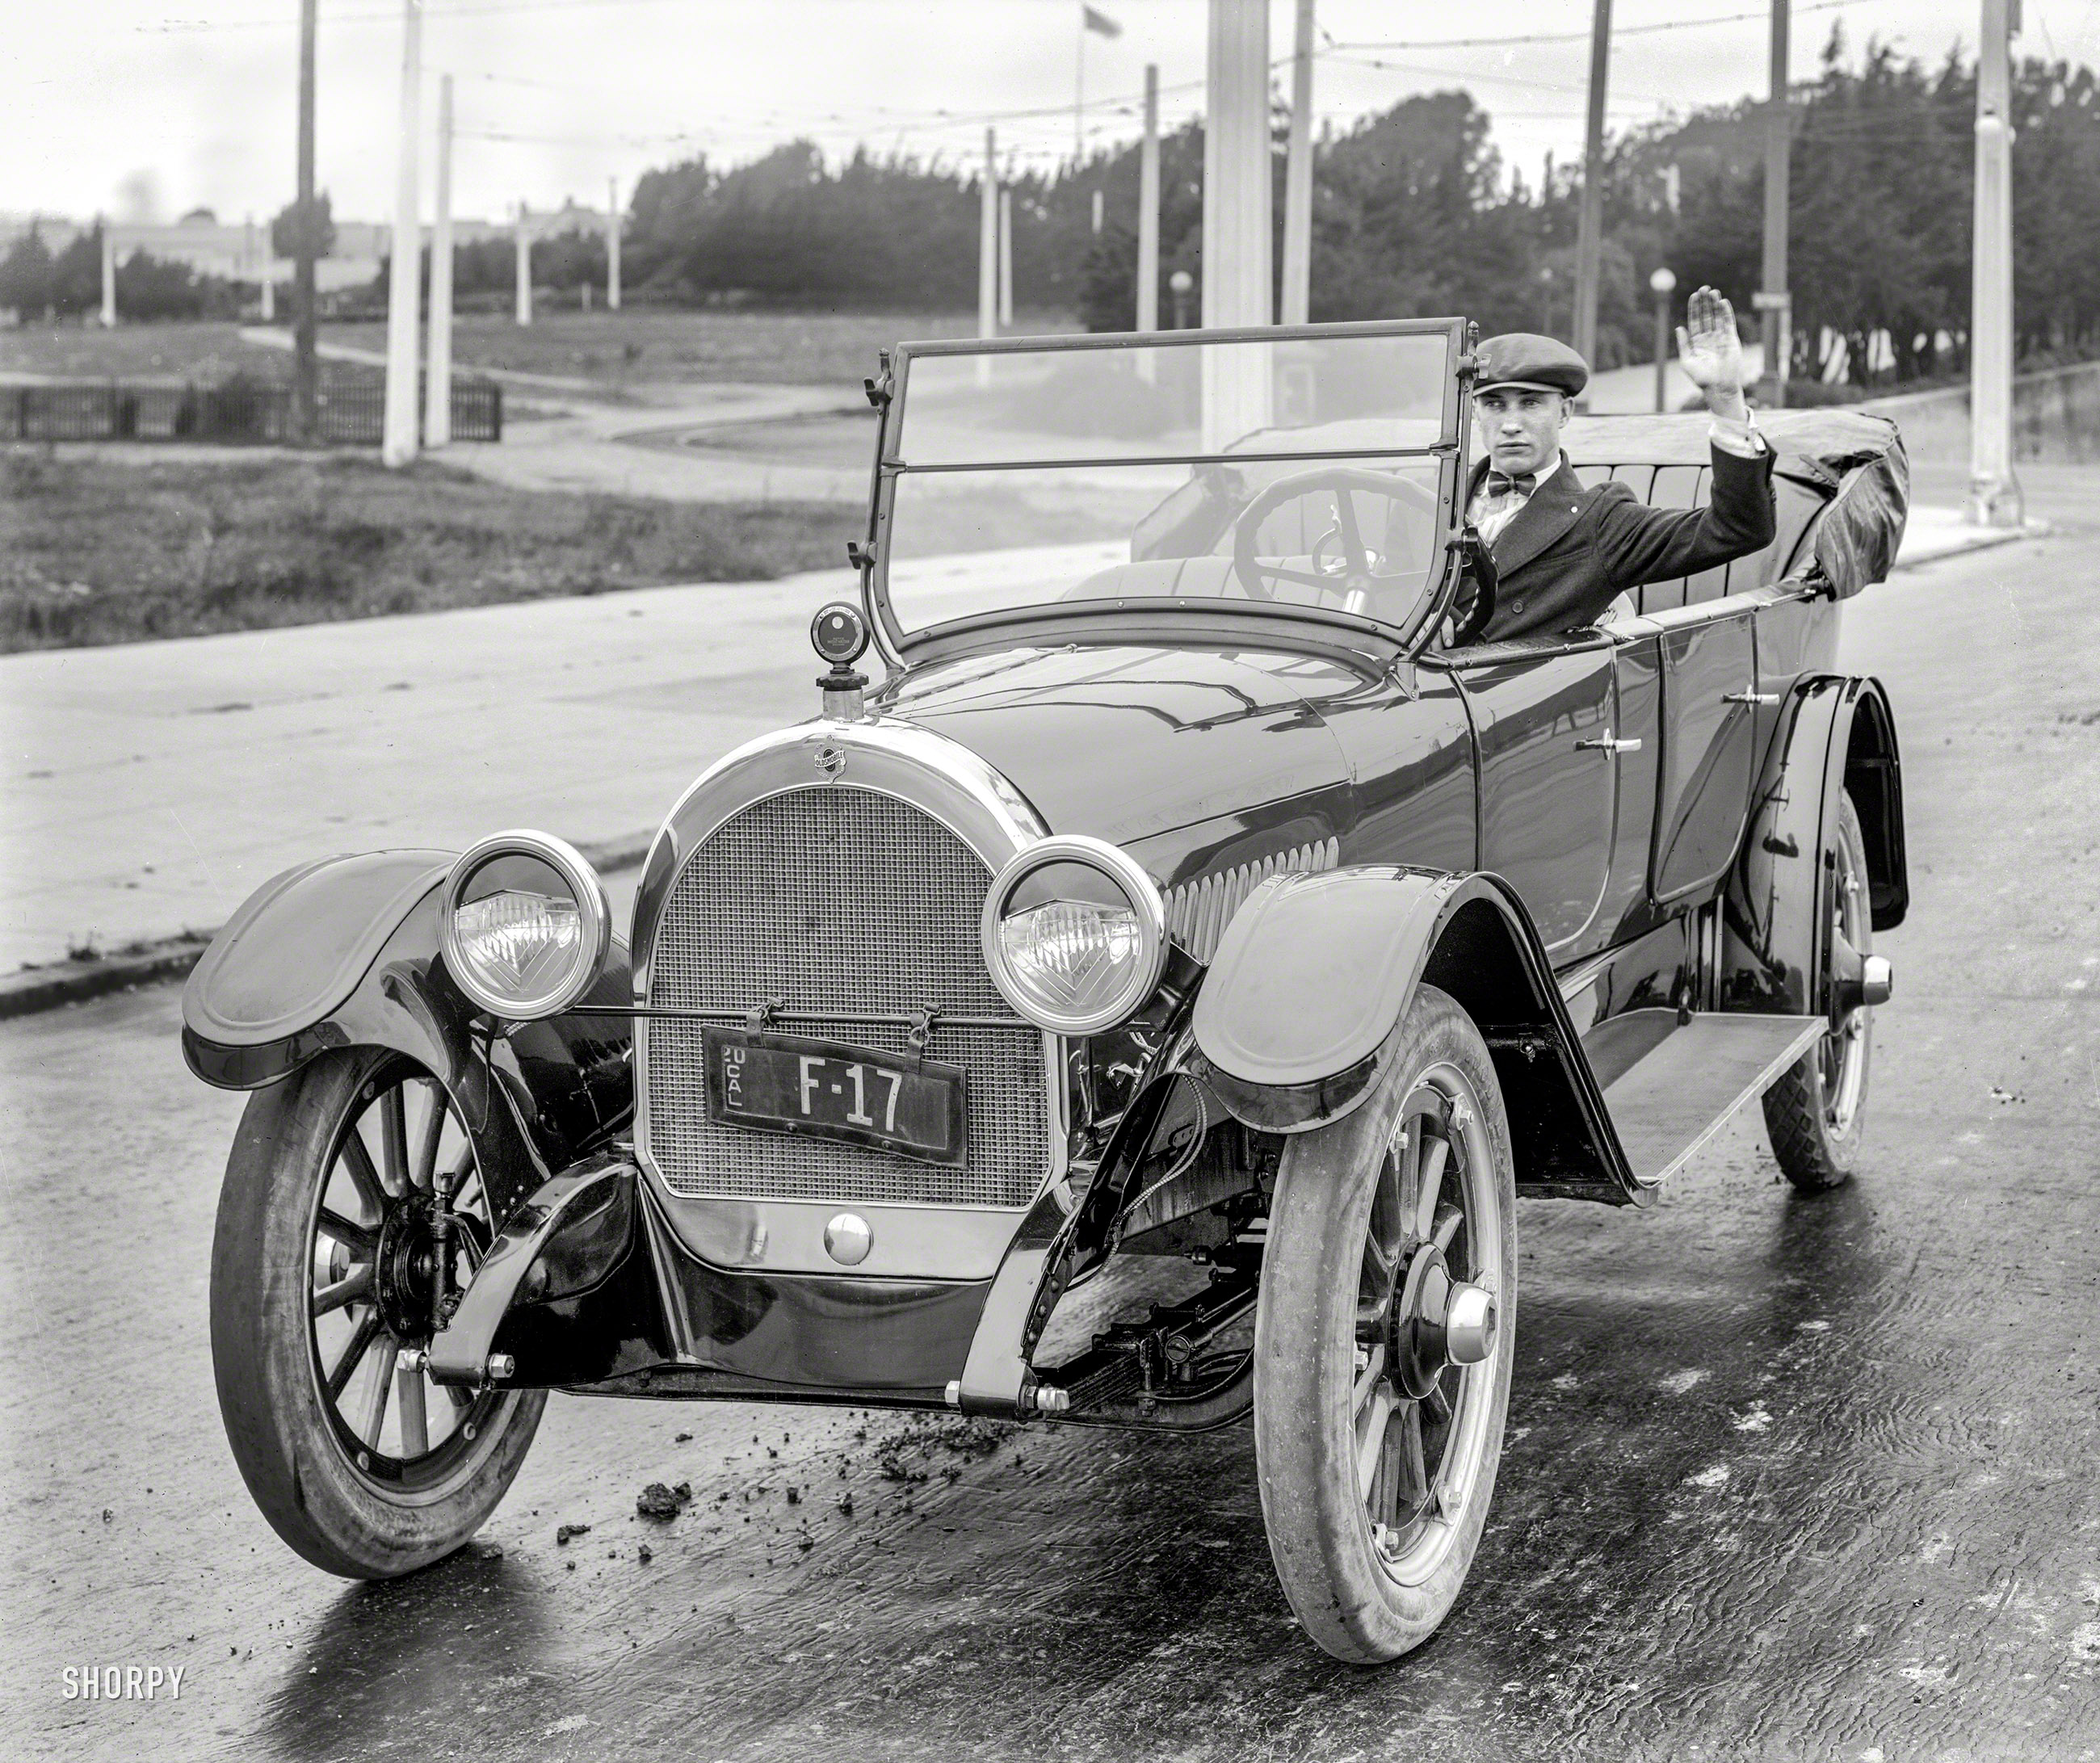 San Francisco in 1920. "Oldsmobile touring car." Its dapper driver signaling either "hello" or a right turn. 5x7 glass negative by Christopher Helin. View full size.